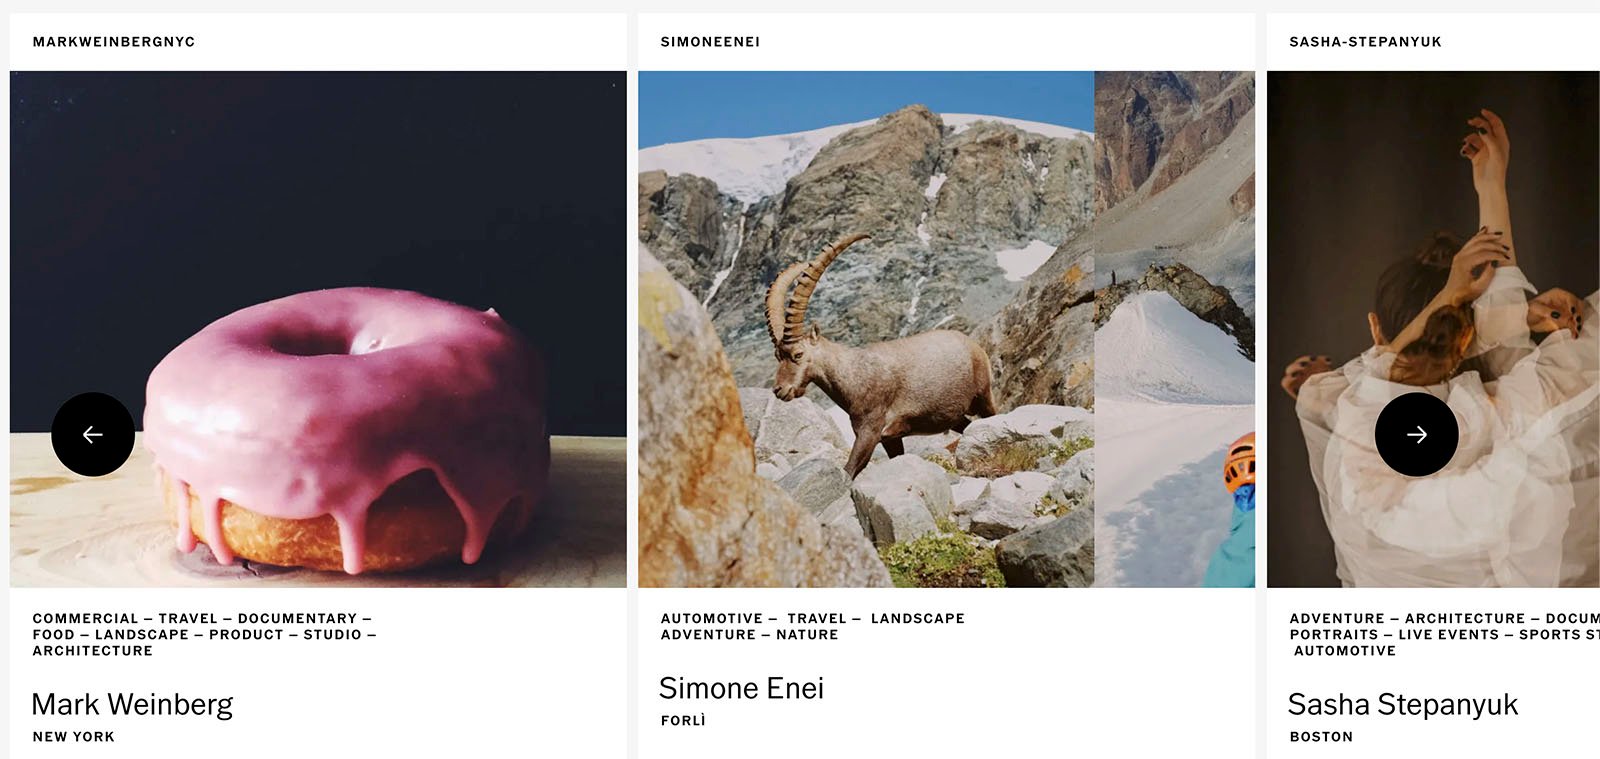 Three images promoting different photographers: a pink doughnut (food photography), a mountain goat on a rocky terrain (wildlife photography), and a close-up of ballet dancers (sports photography).